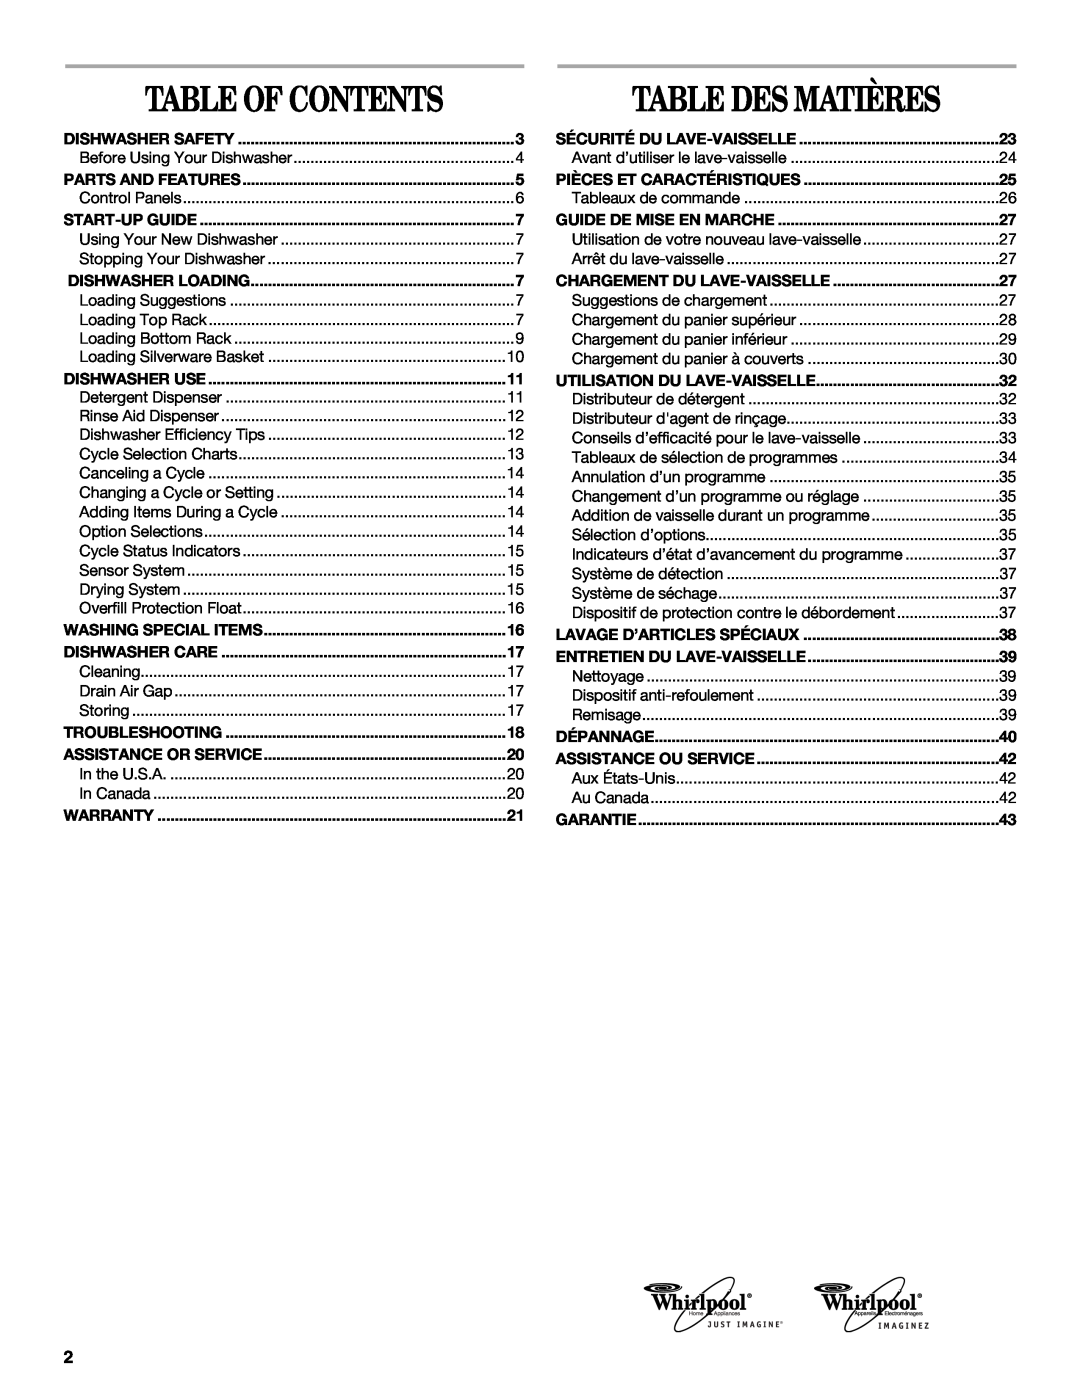 Whirlpool DU1145, DU1200, DU1148, DU1015, DU1055, DU1100, DU1101, DU1248, DU1201, DU1245 Table Des Matières, Table Of Contents 